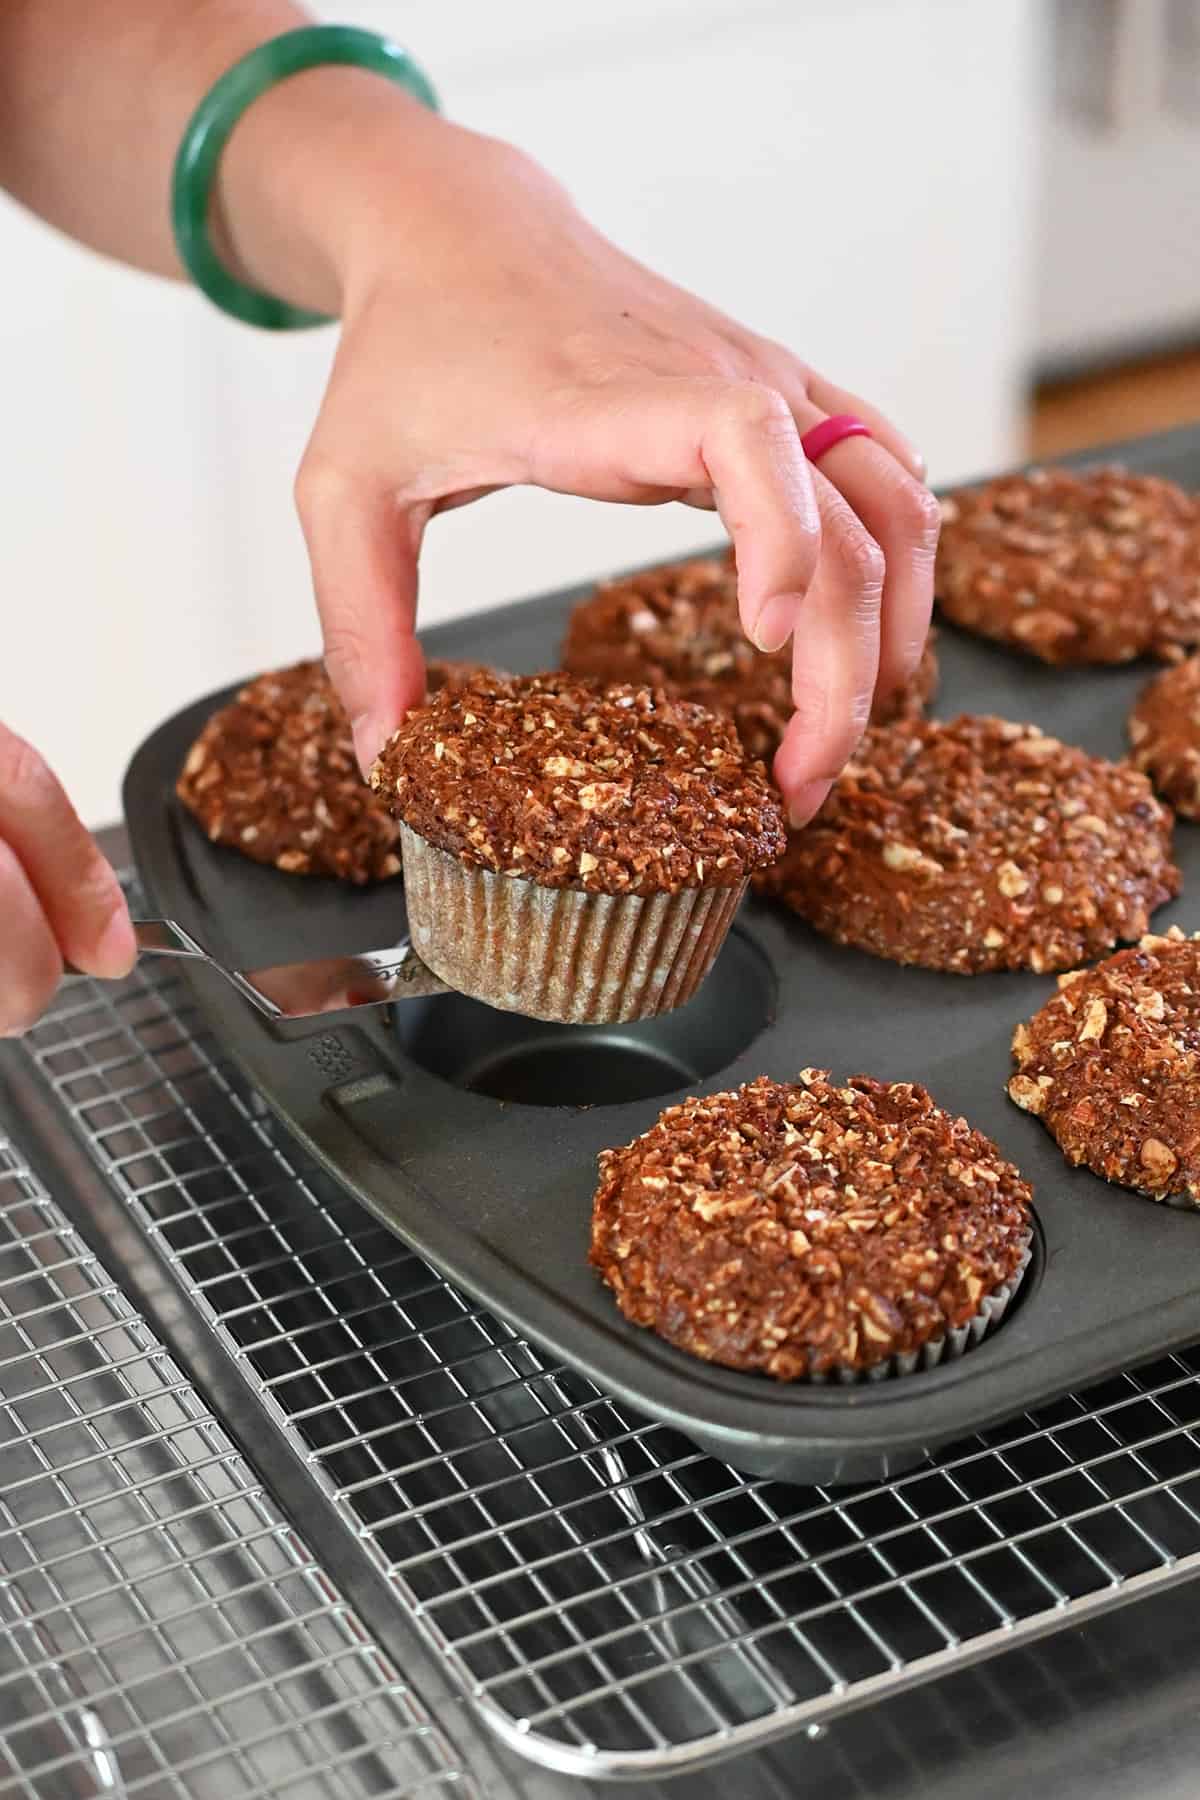 Removing the baked apple muffins from the muffin pan with a small offset spatula and transferring them to a wire cooling rack.